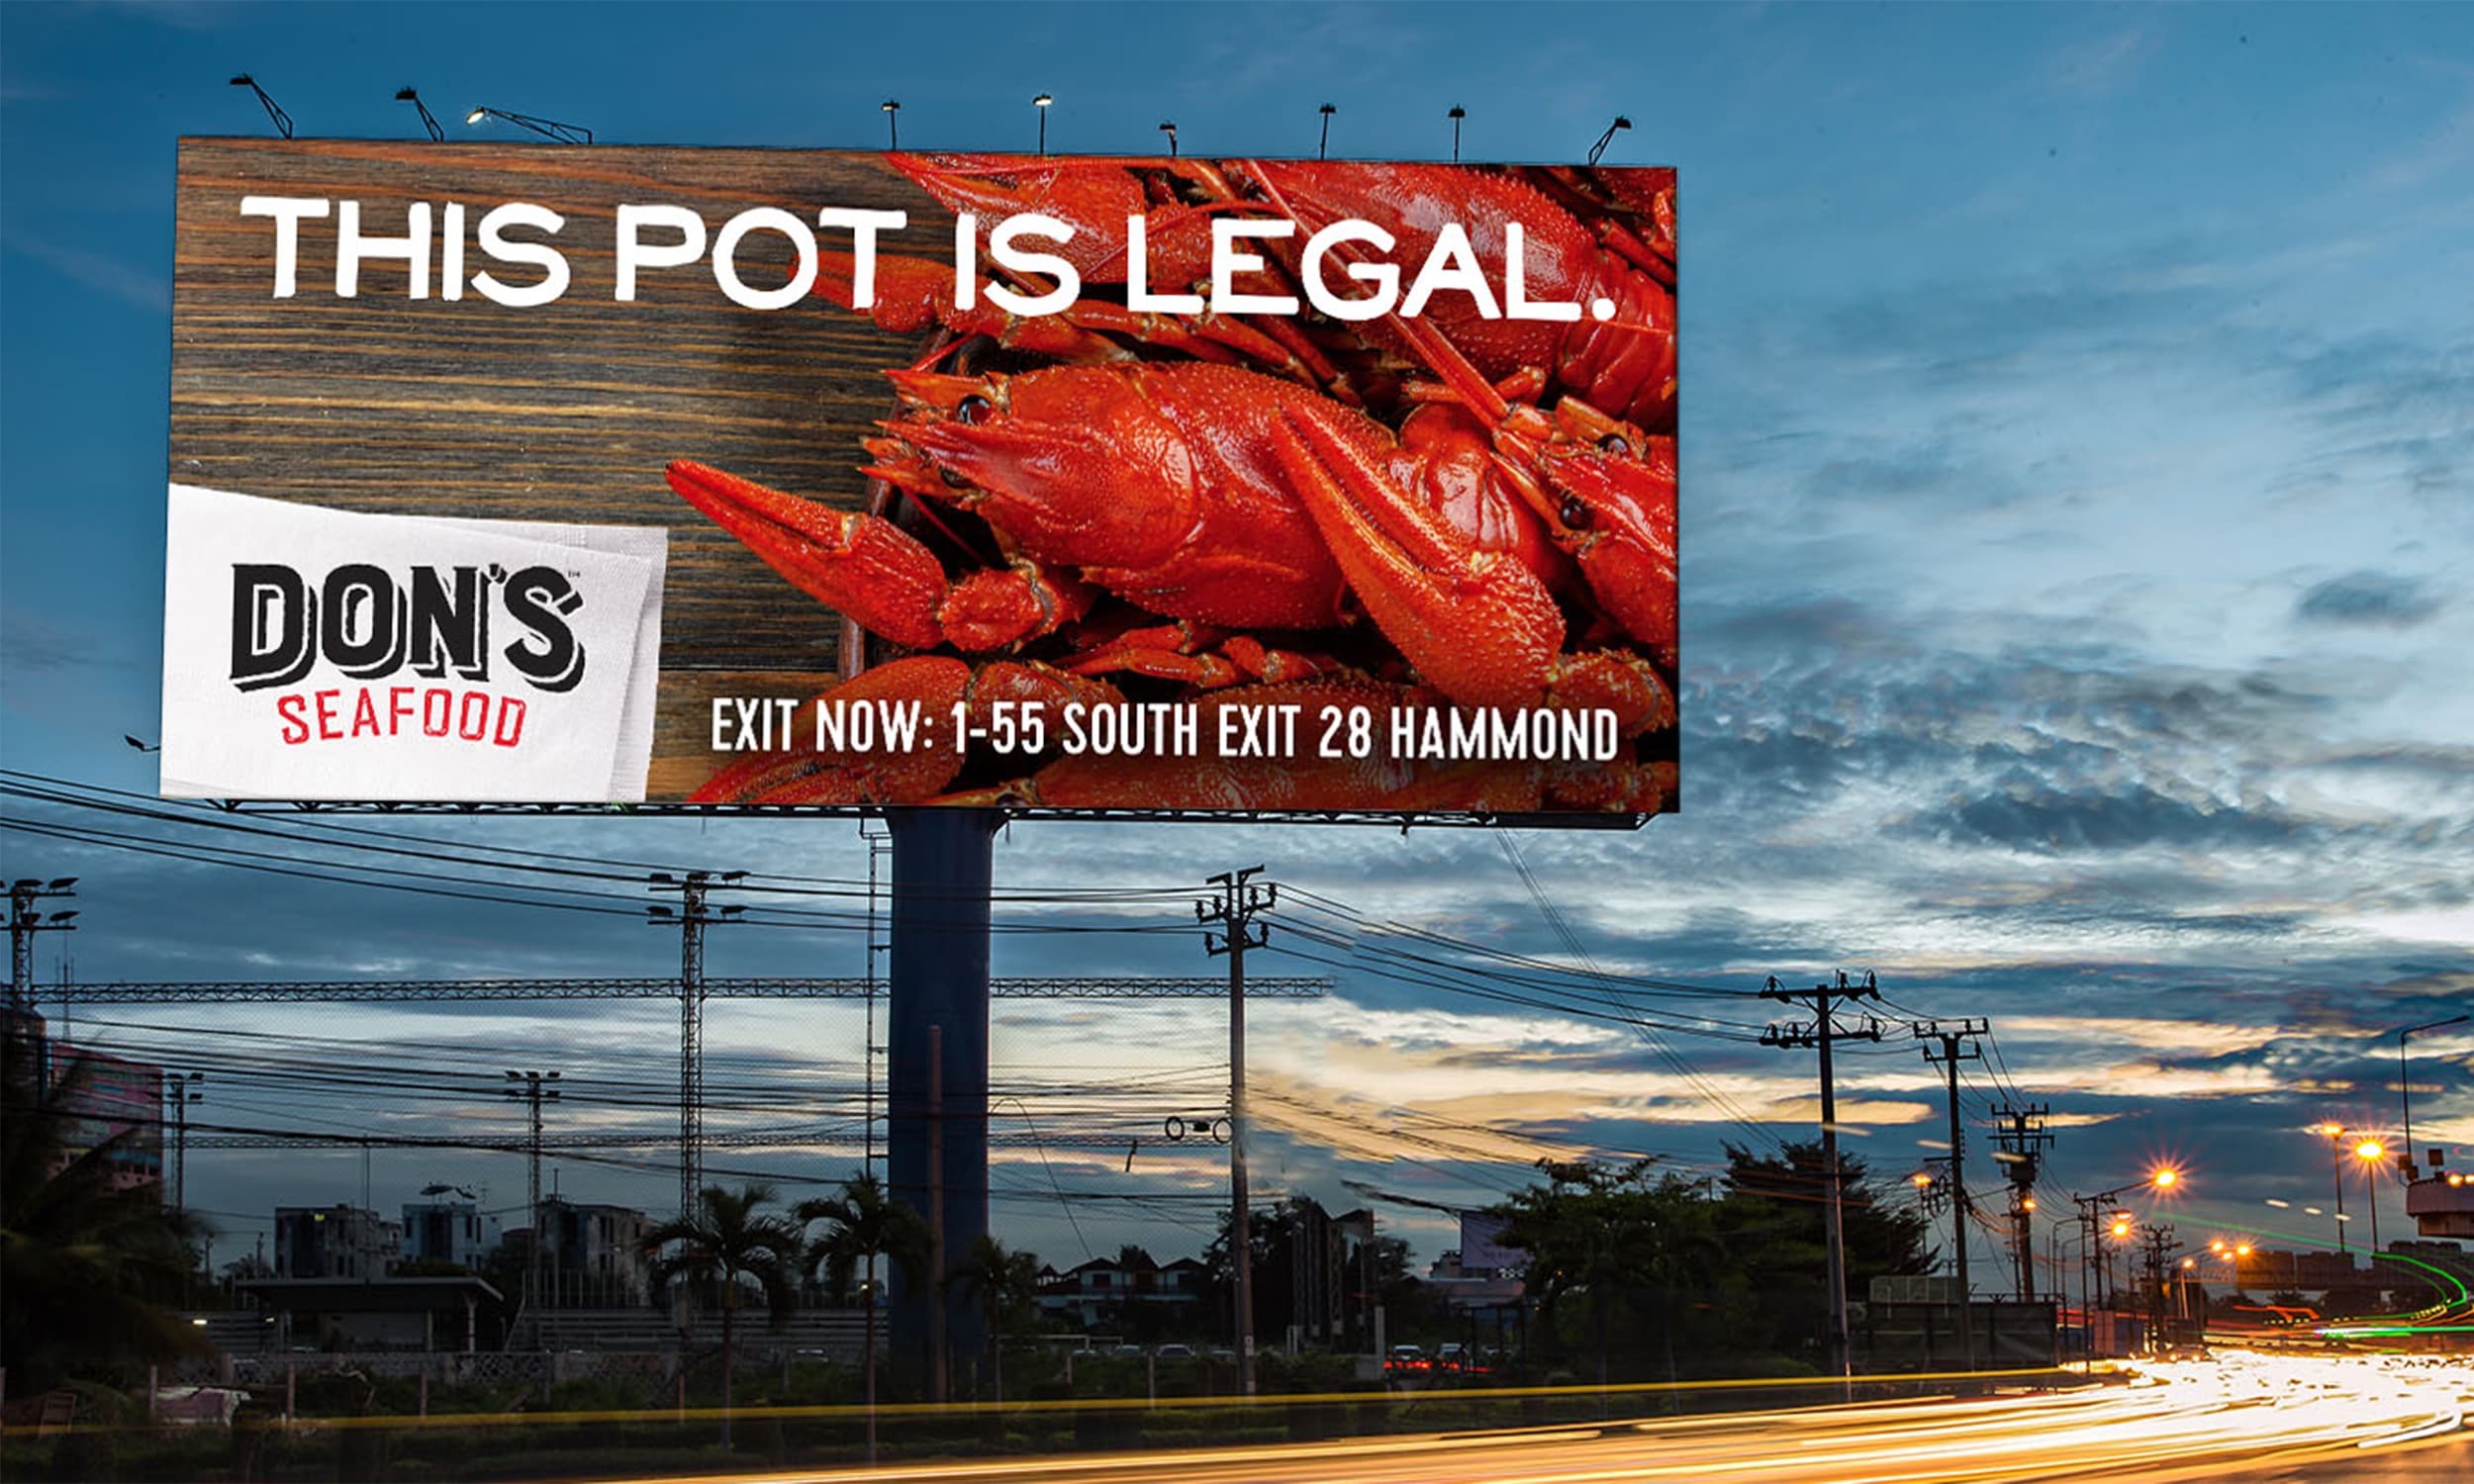 Don's crawfish billboard in the evening time